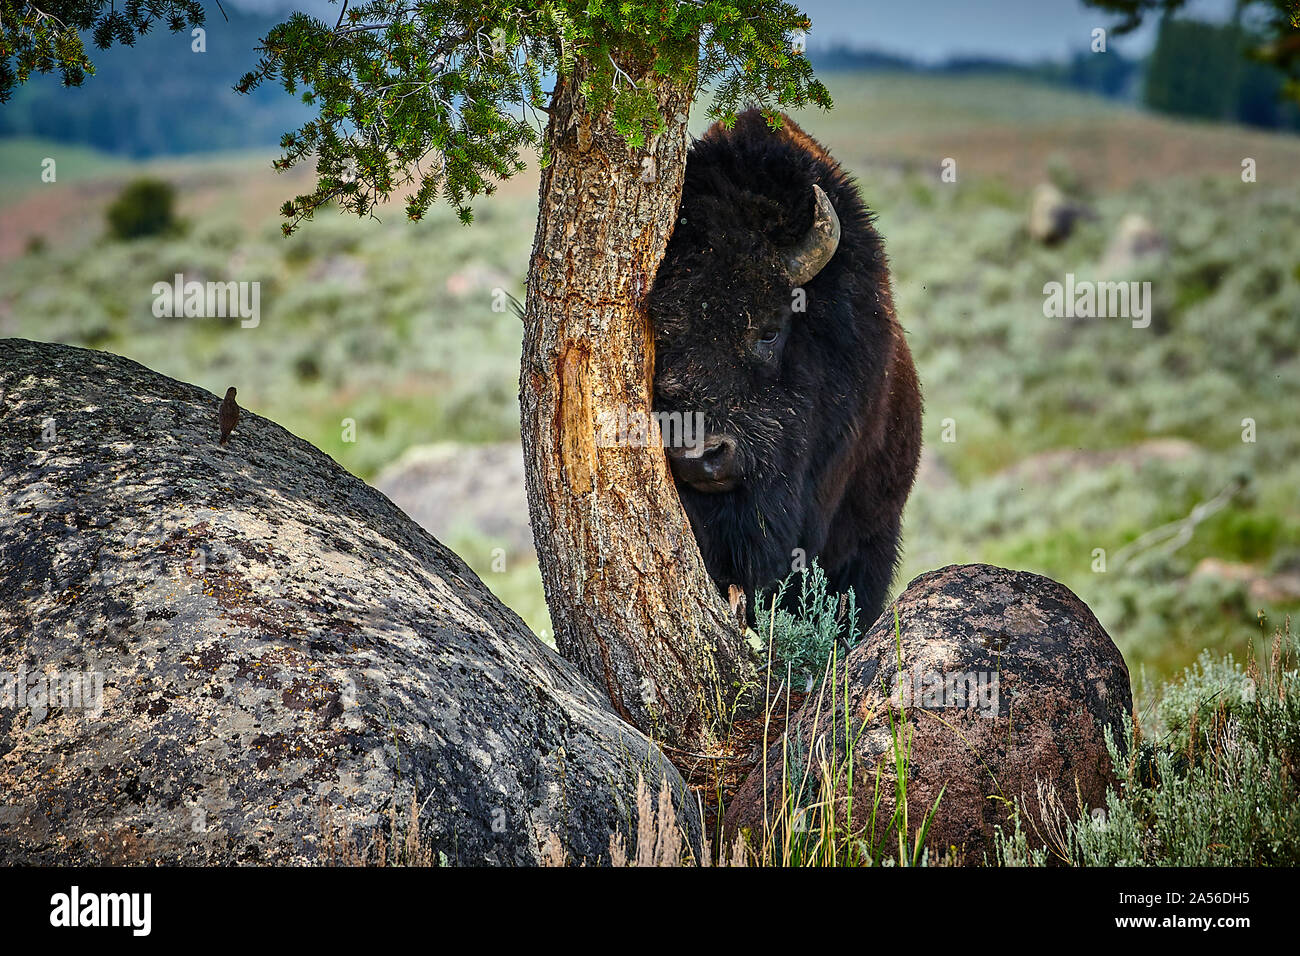 Bison rubbing pine tree at Yellowstone National Park. Stock Photo